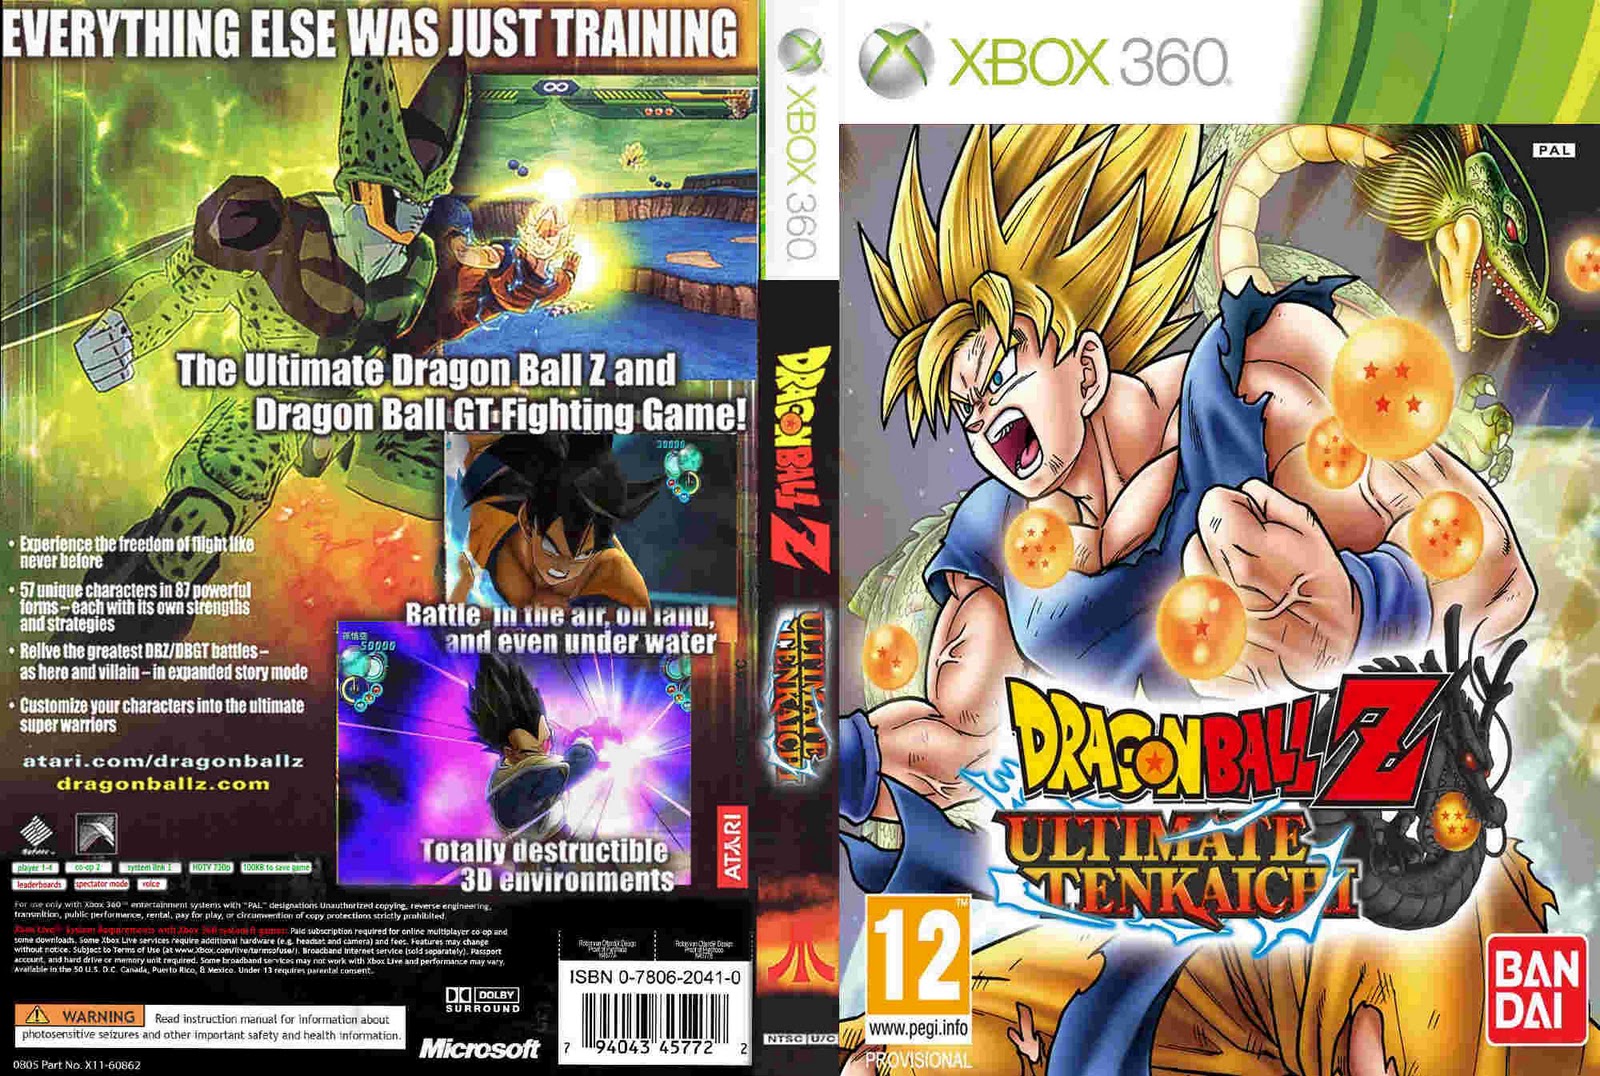 Where Can I Download Dbz Ultimate Tenkaichi For Pc